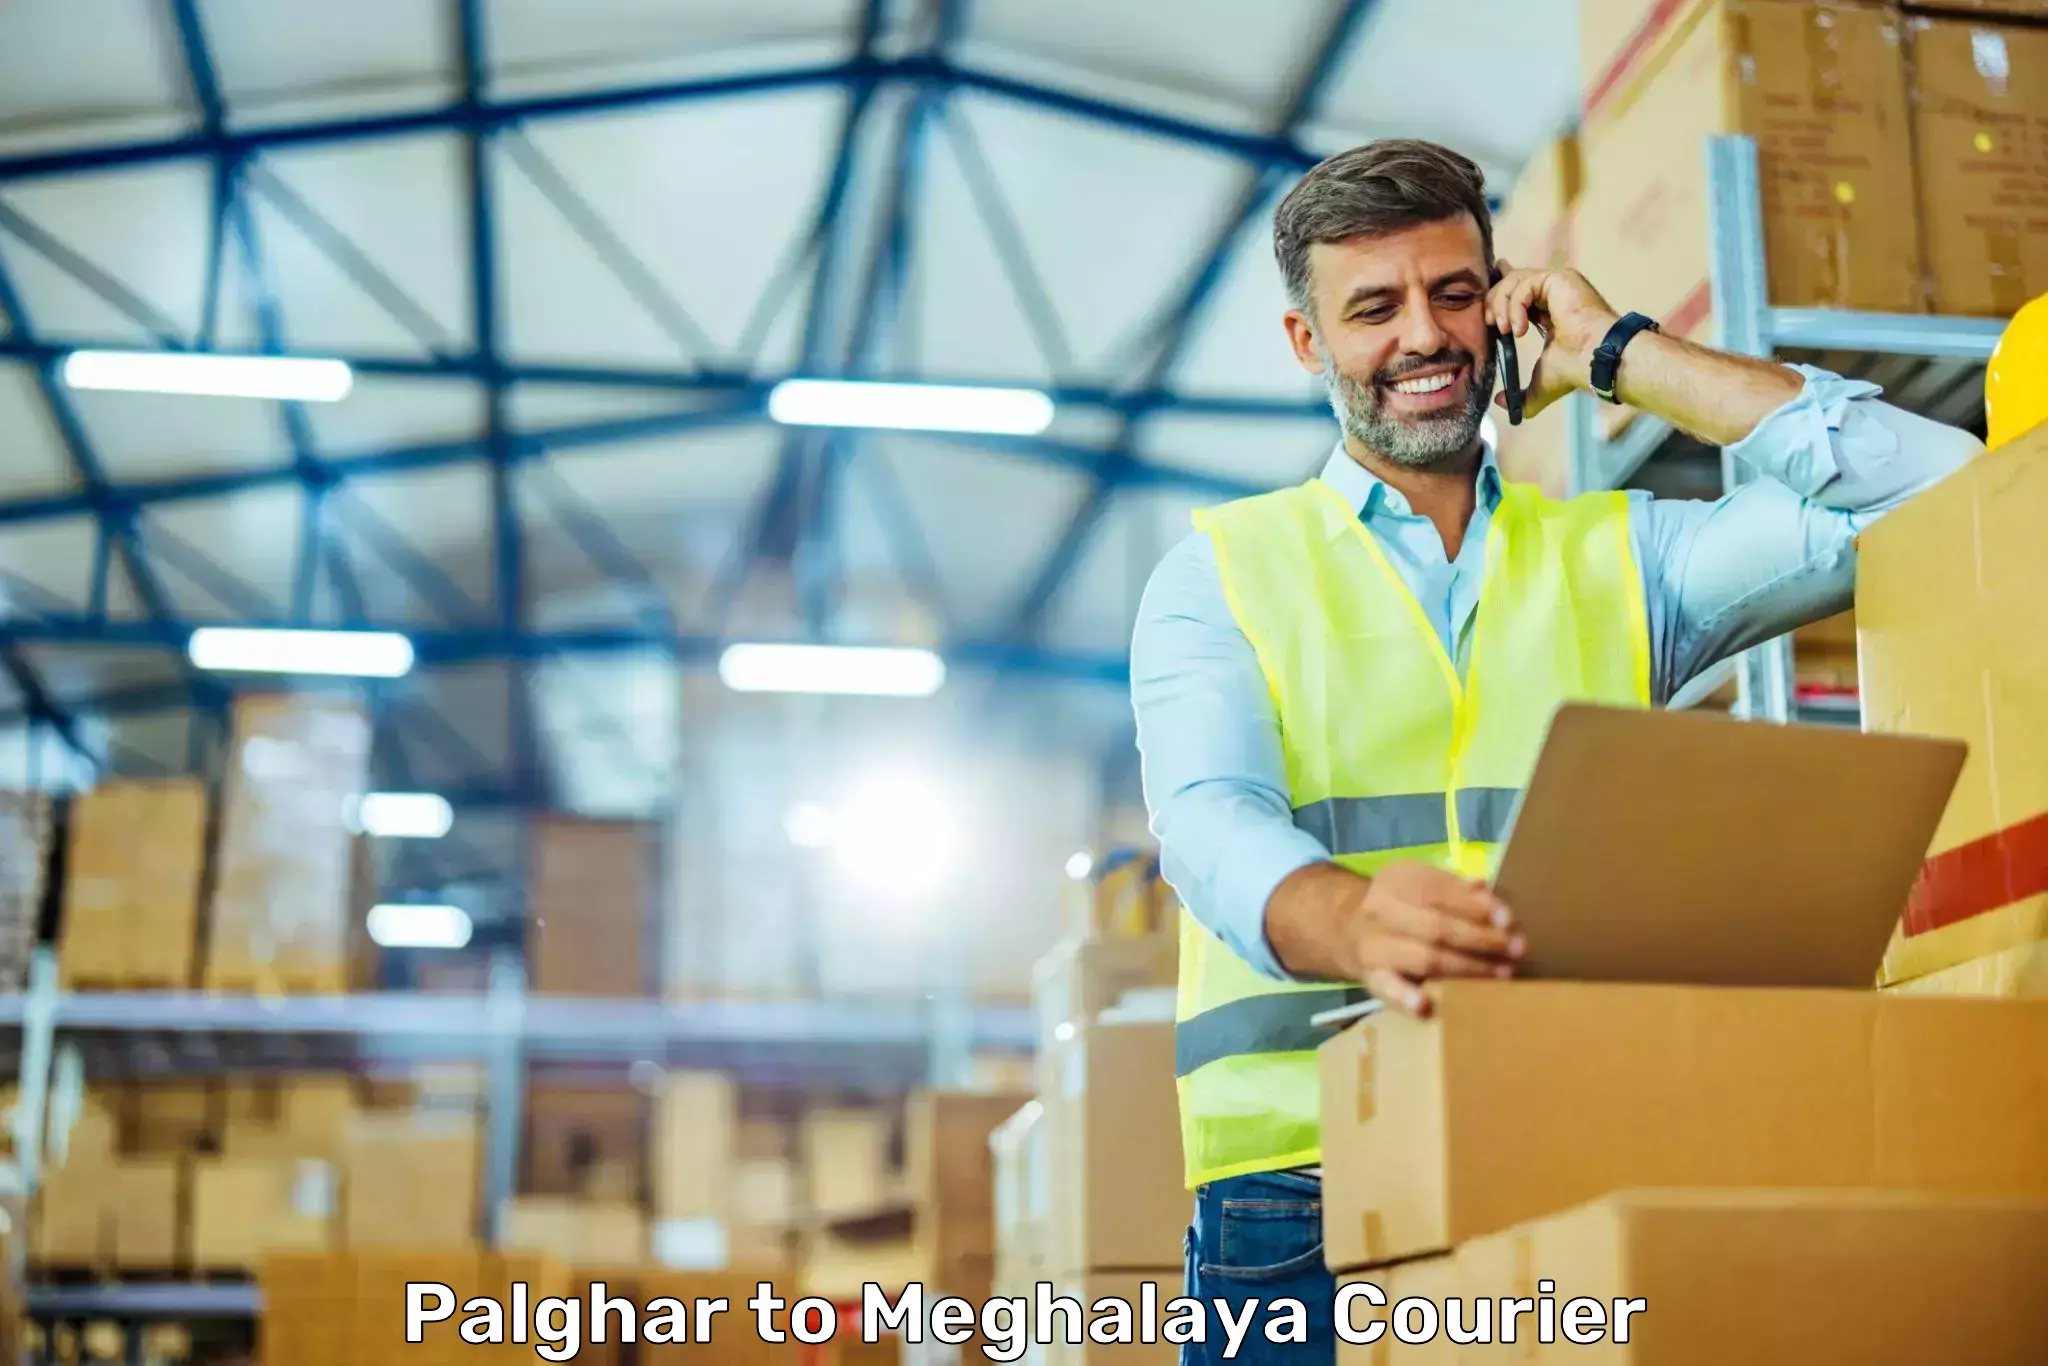 Nationwide delivery network Palghar to Meghalaya